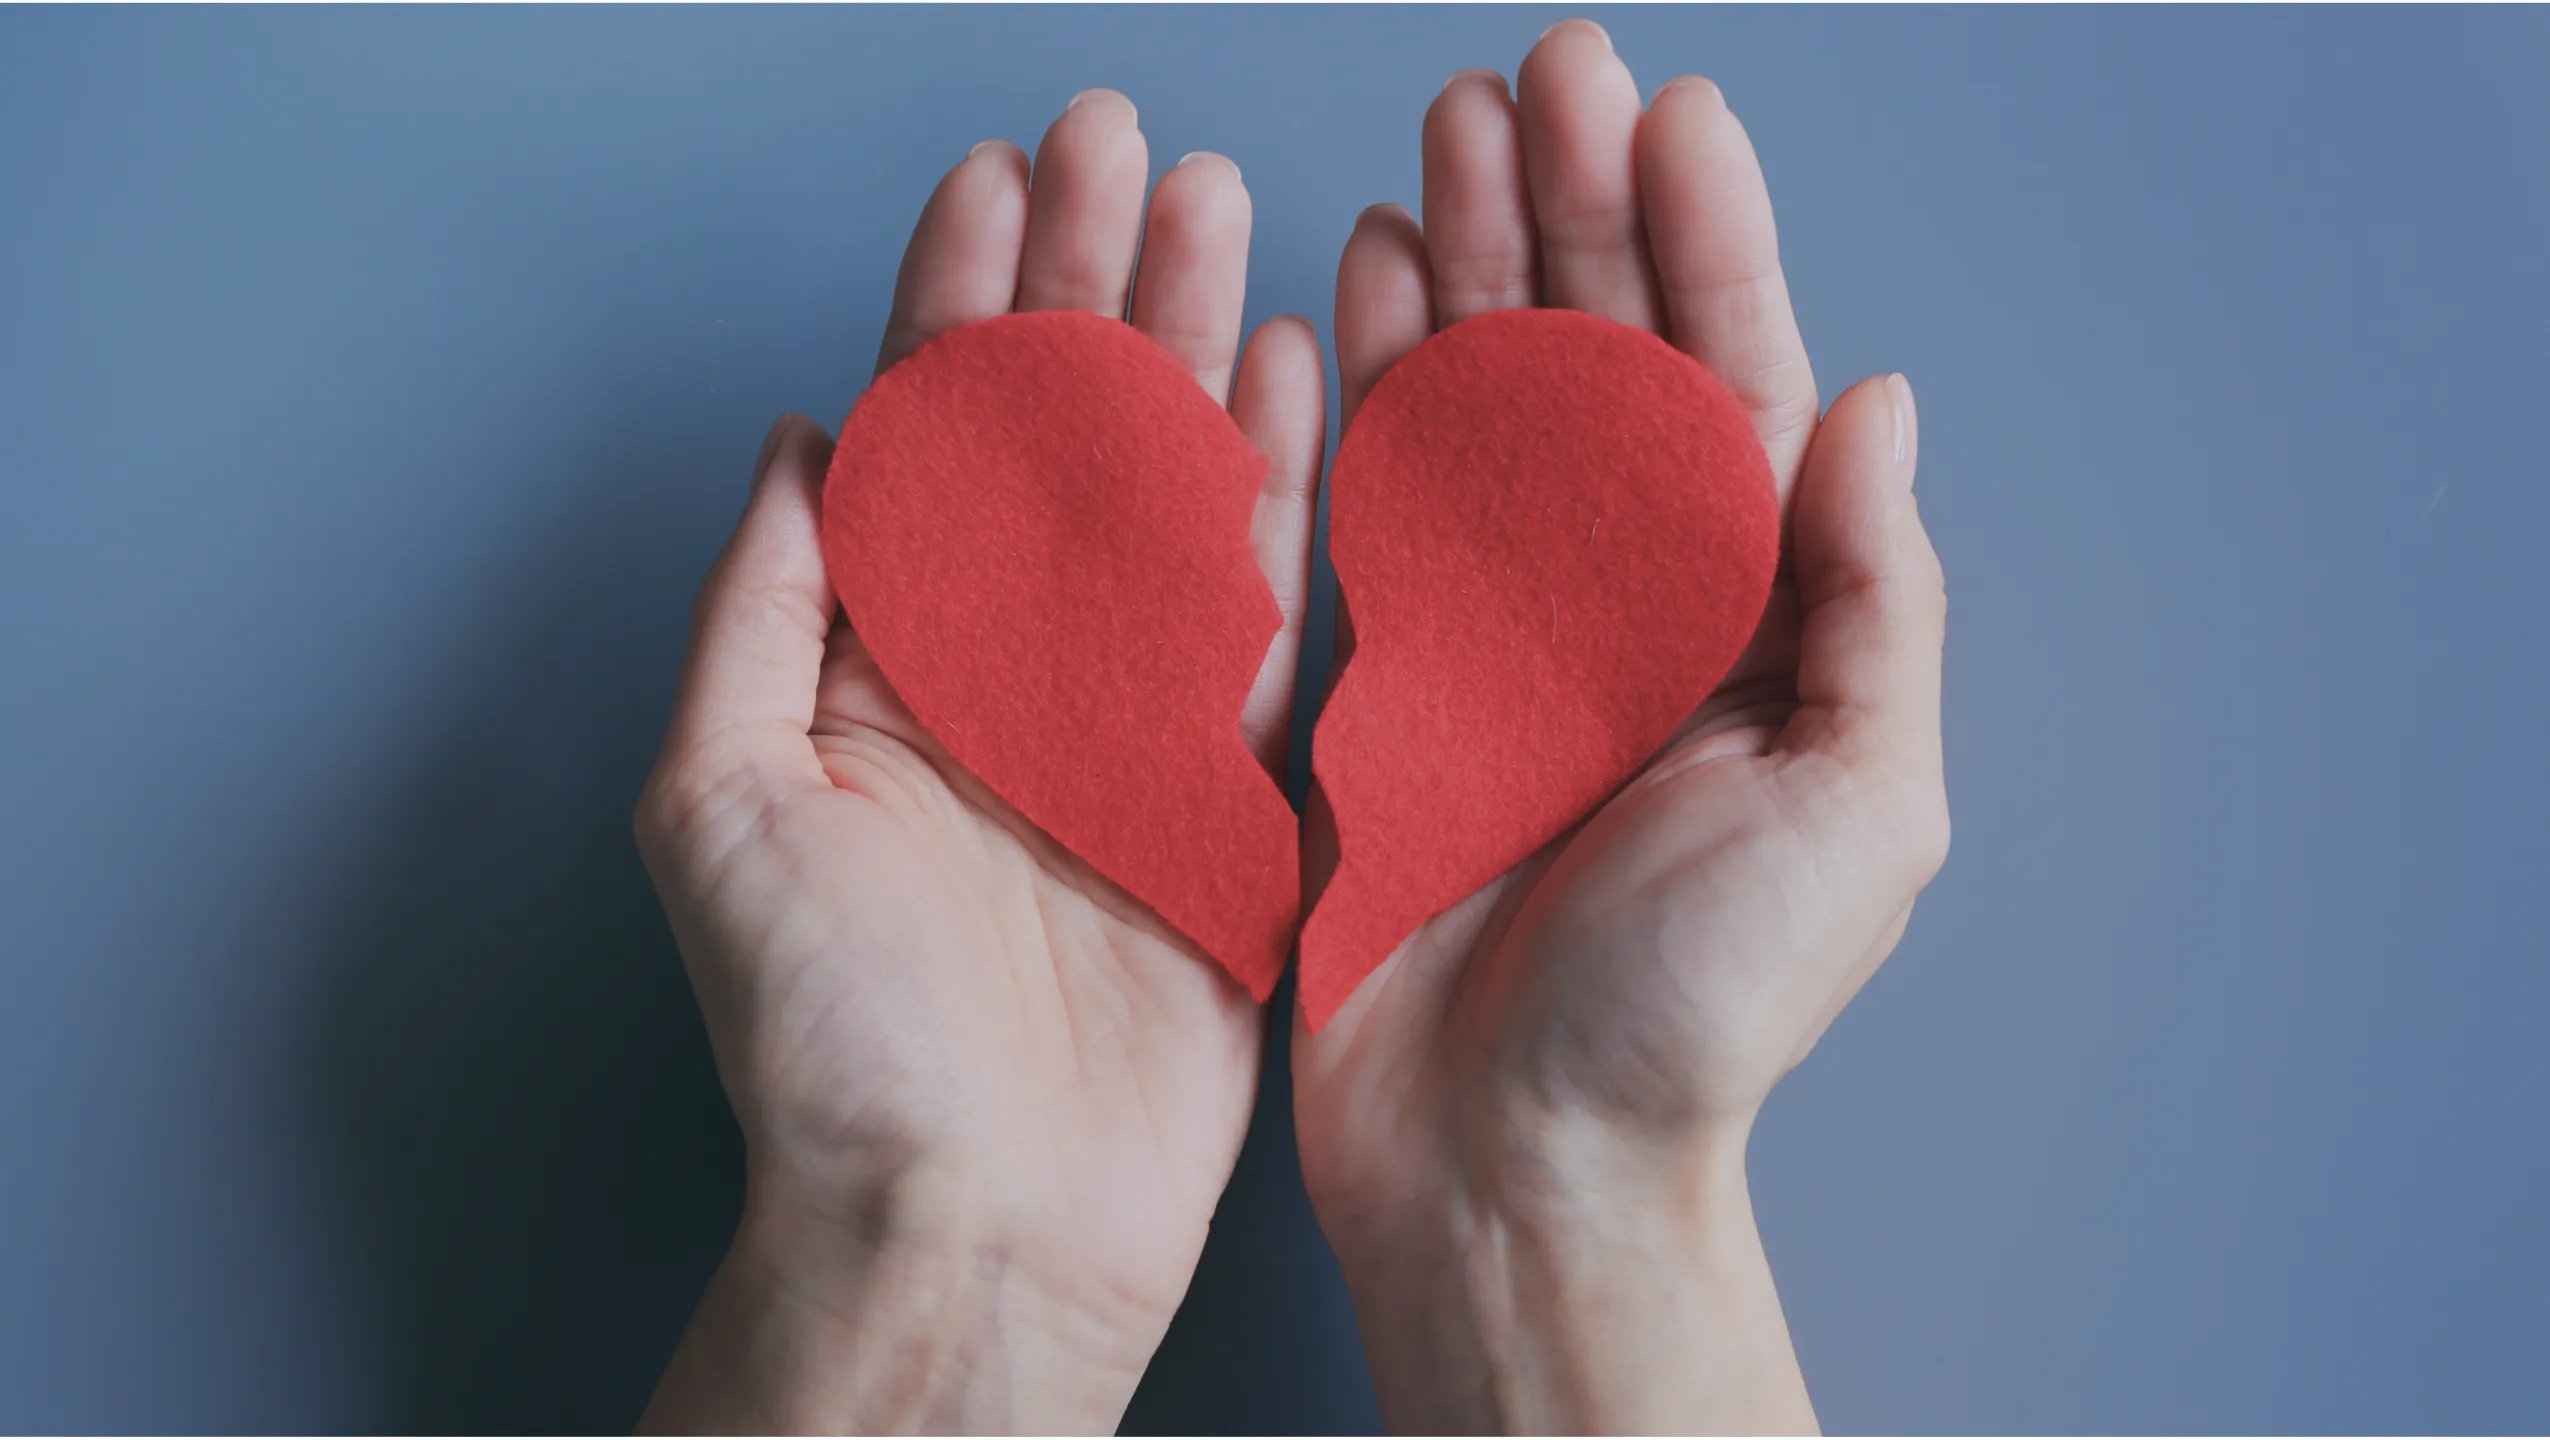 This is an illustration of a broken heart made of felt that is being held by a pair of hands. It symbolizes a negative experience or disappointment with the referral software industry.